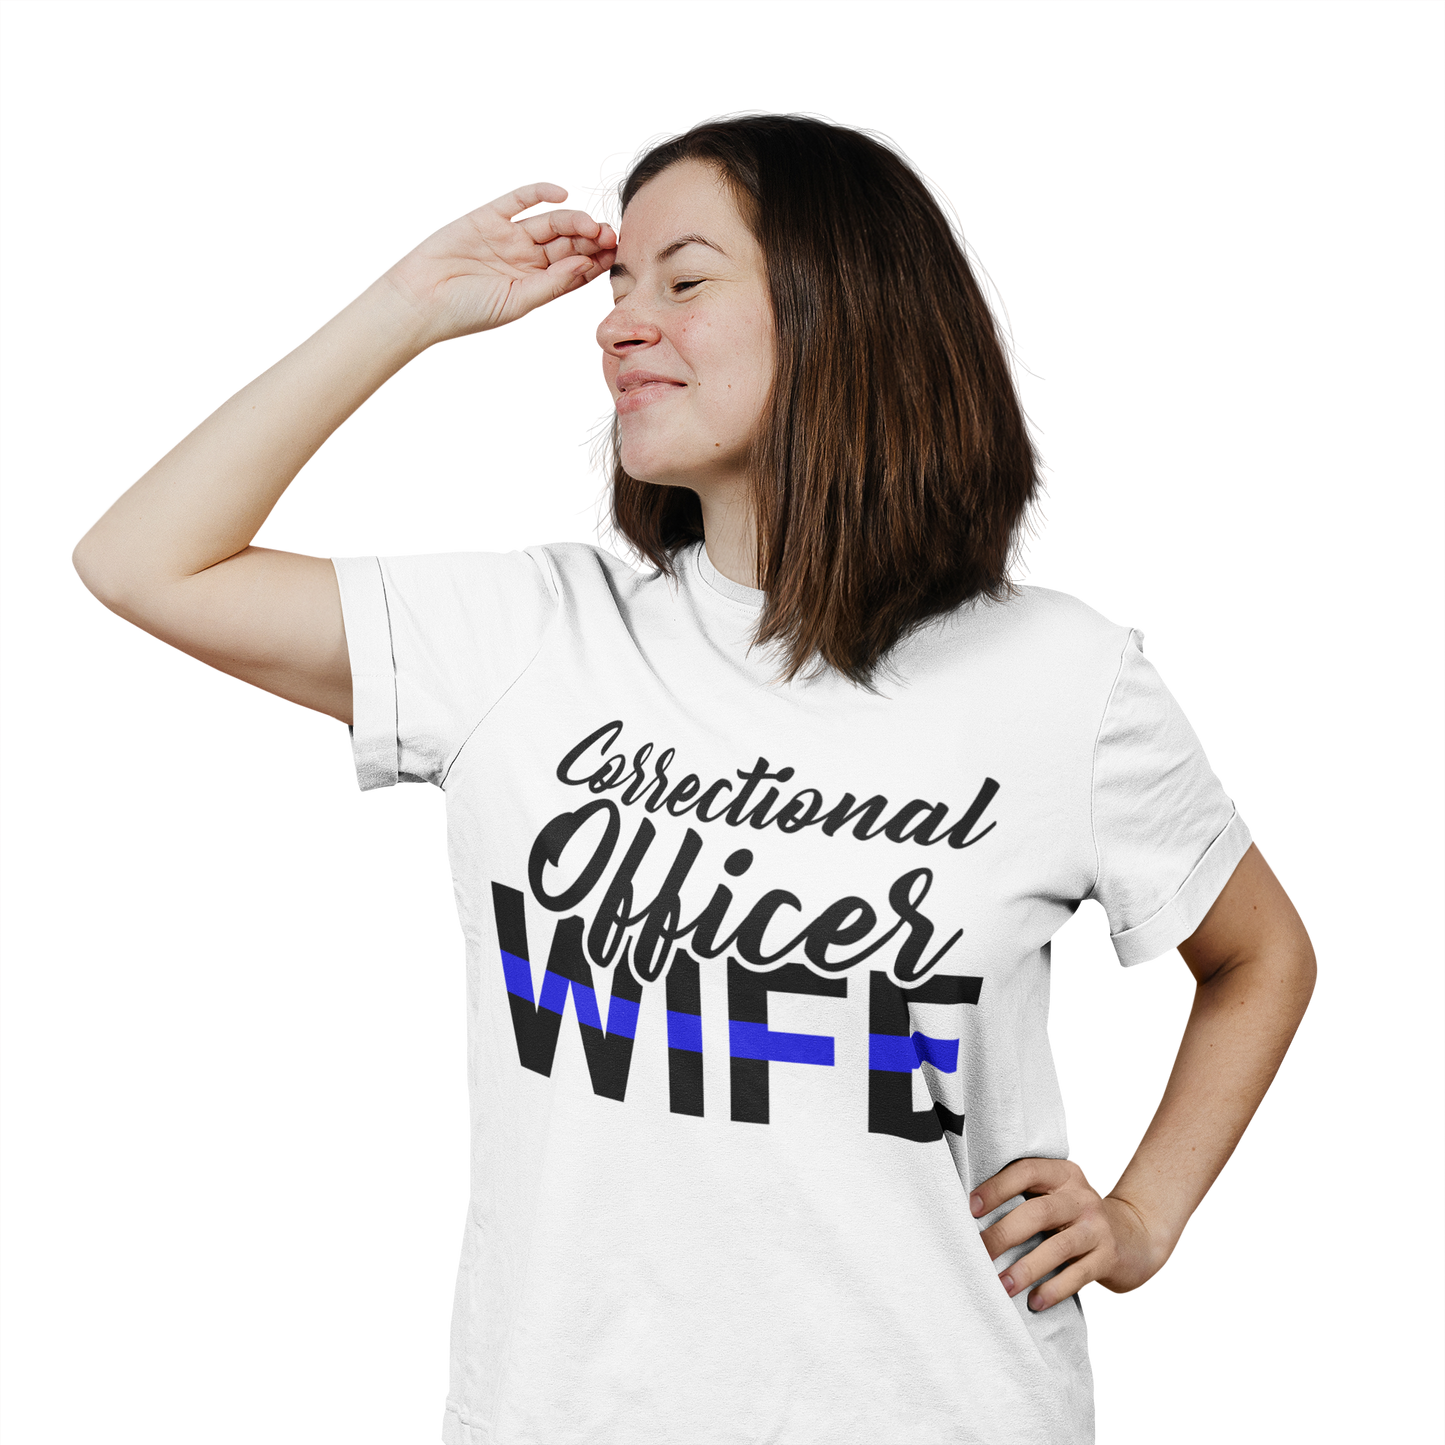 Correctional Officer Wife Thin Blue Line T-Shirt